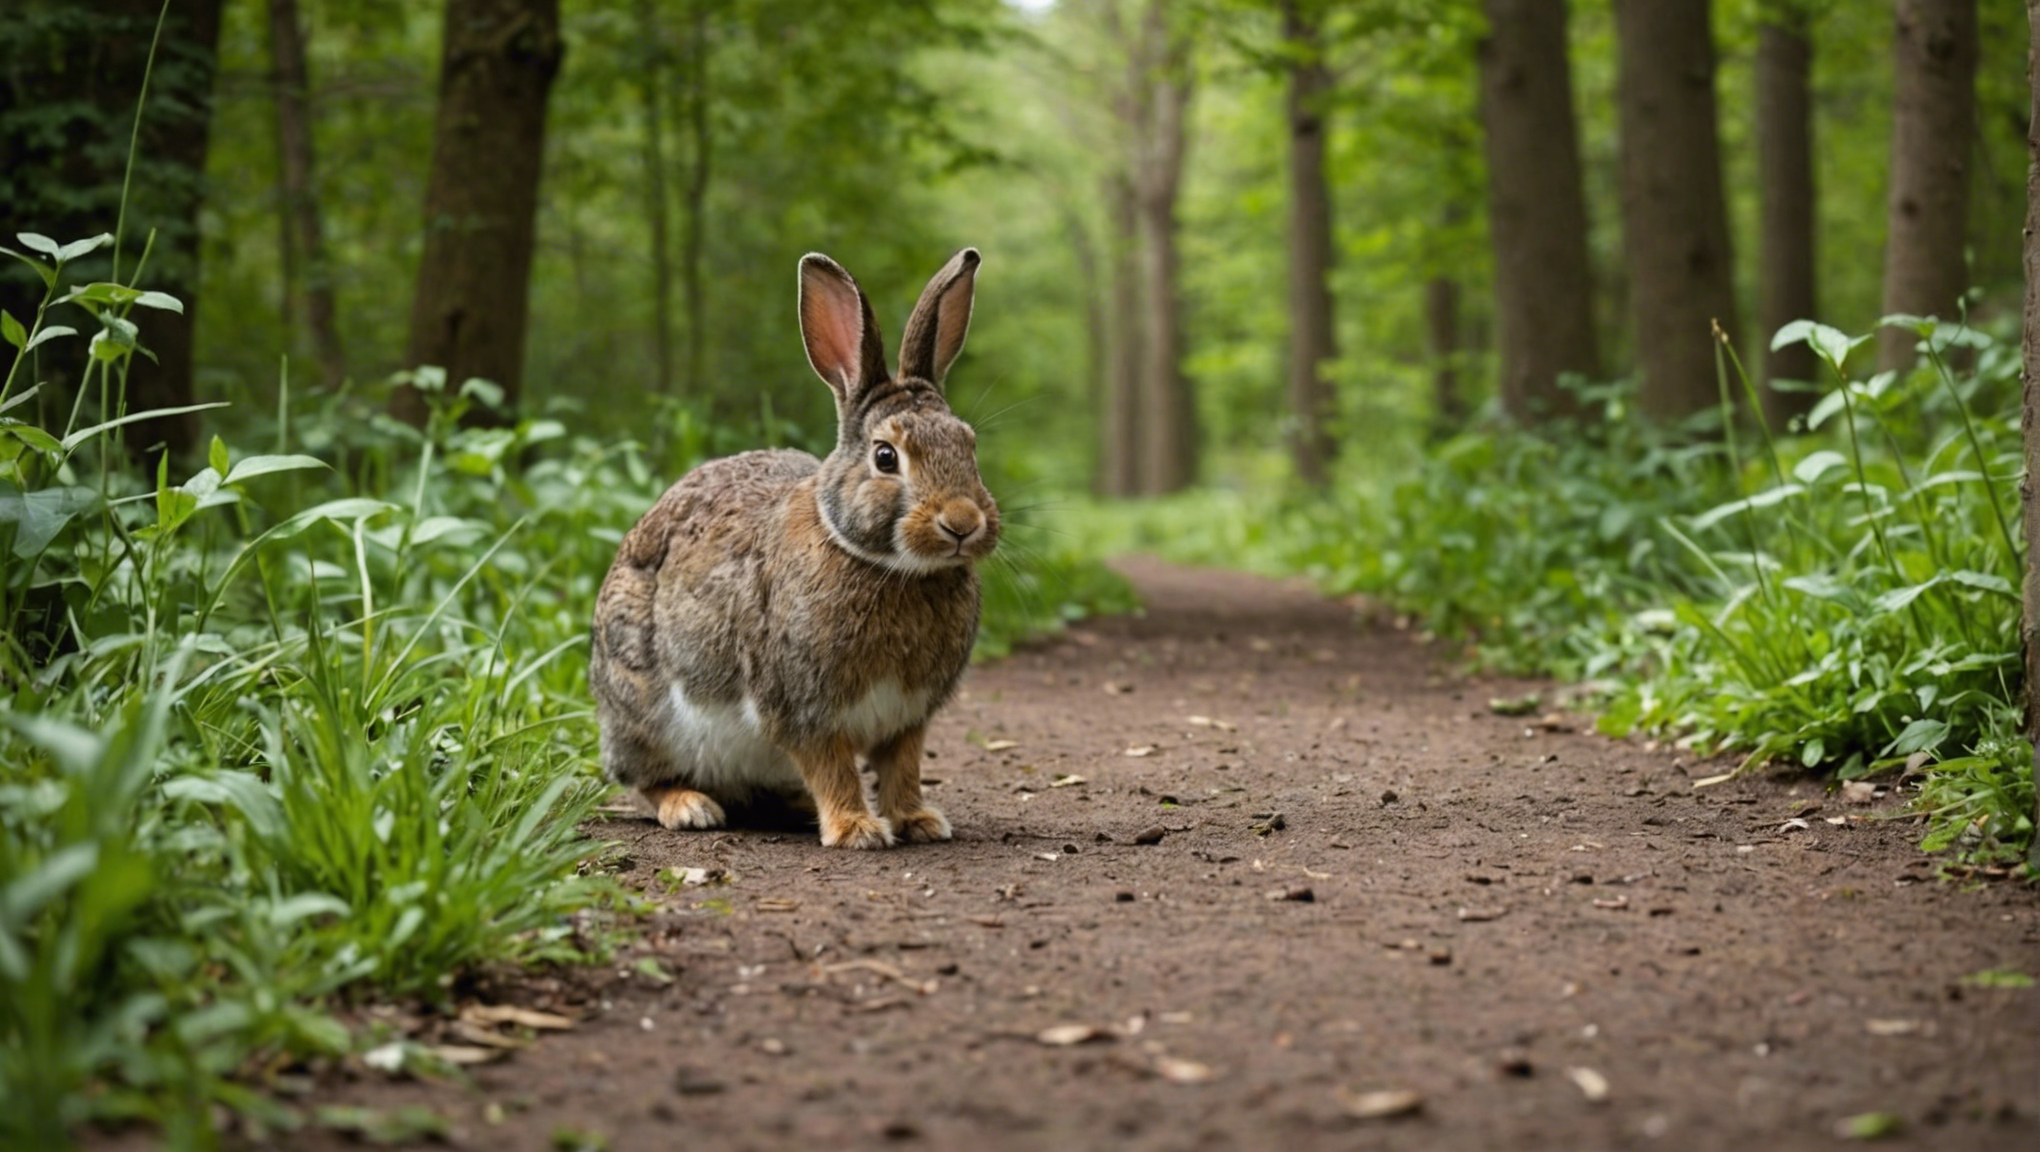 discover the significance and symbolism behind the act of a rabbit crossing your path and what it may mean for your life.